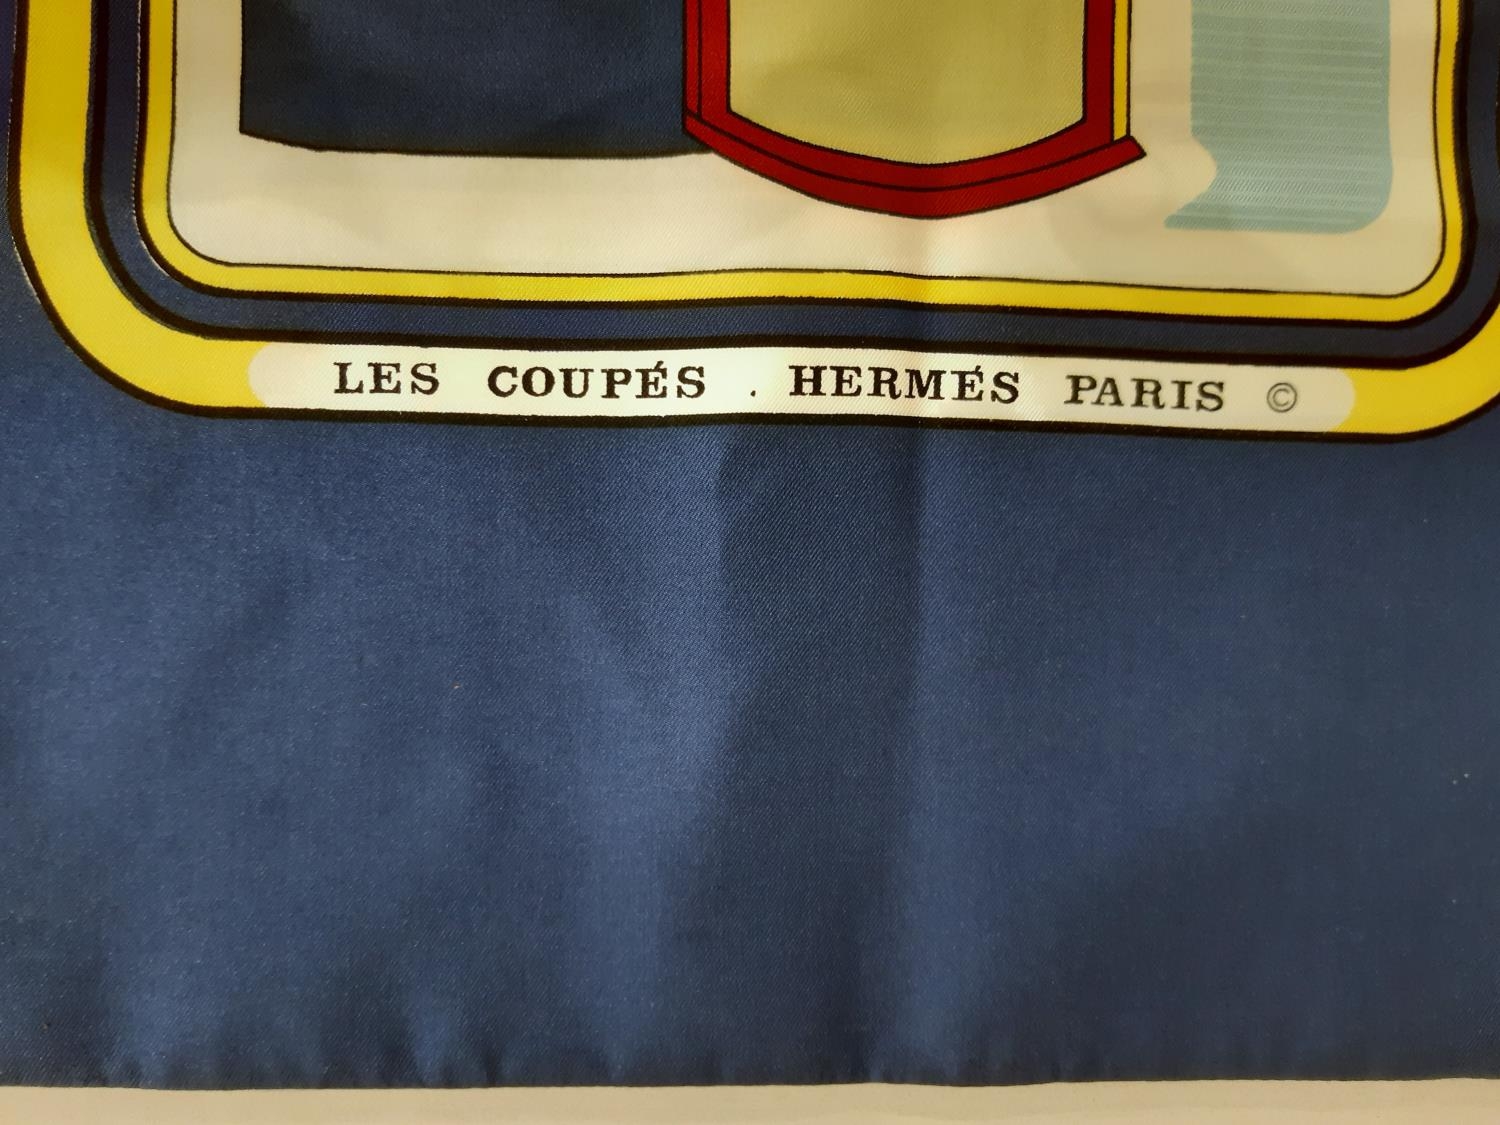 Hermès Les Coupes silk scarf designed by Françoise de la Perriere 176x 33cm in abstract carriage - Image 5 of 10